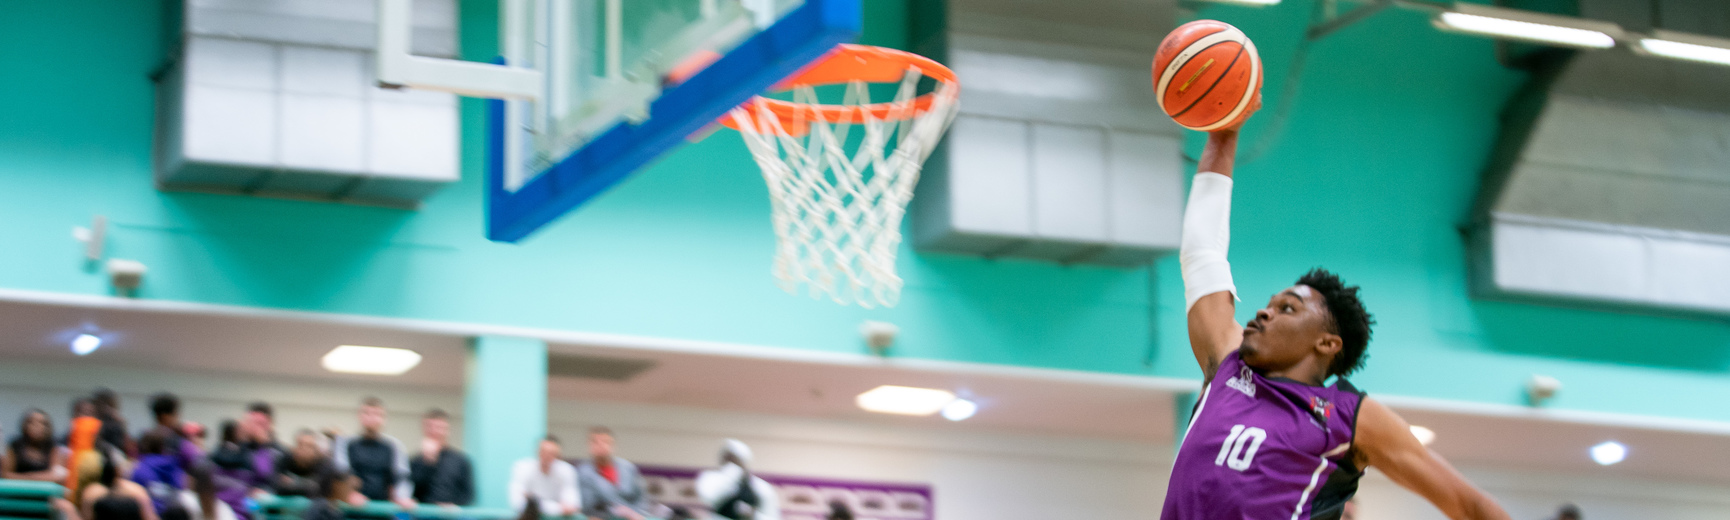 a male student about to dunk a basketball through a hoop in a competitive game